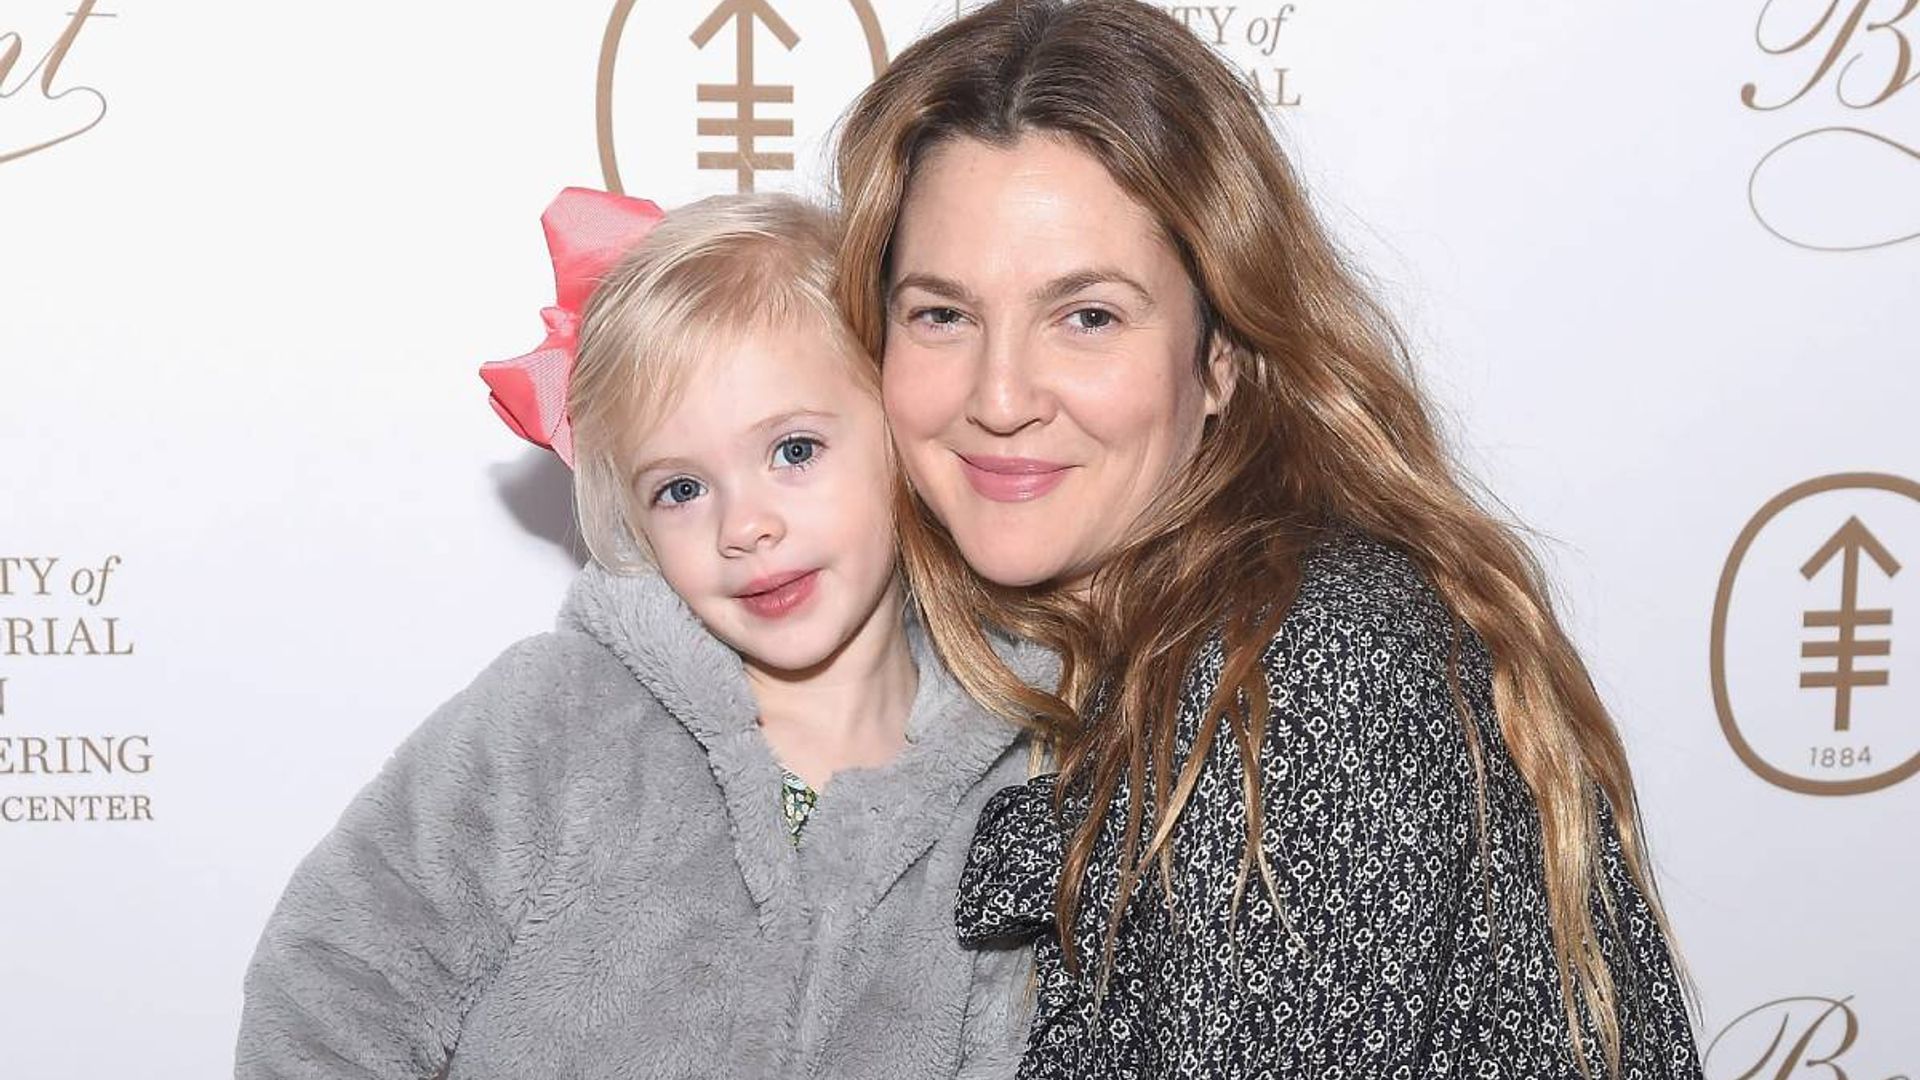 Drew Barrymore shares rare video with